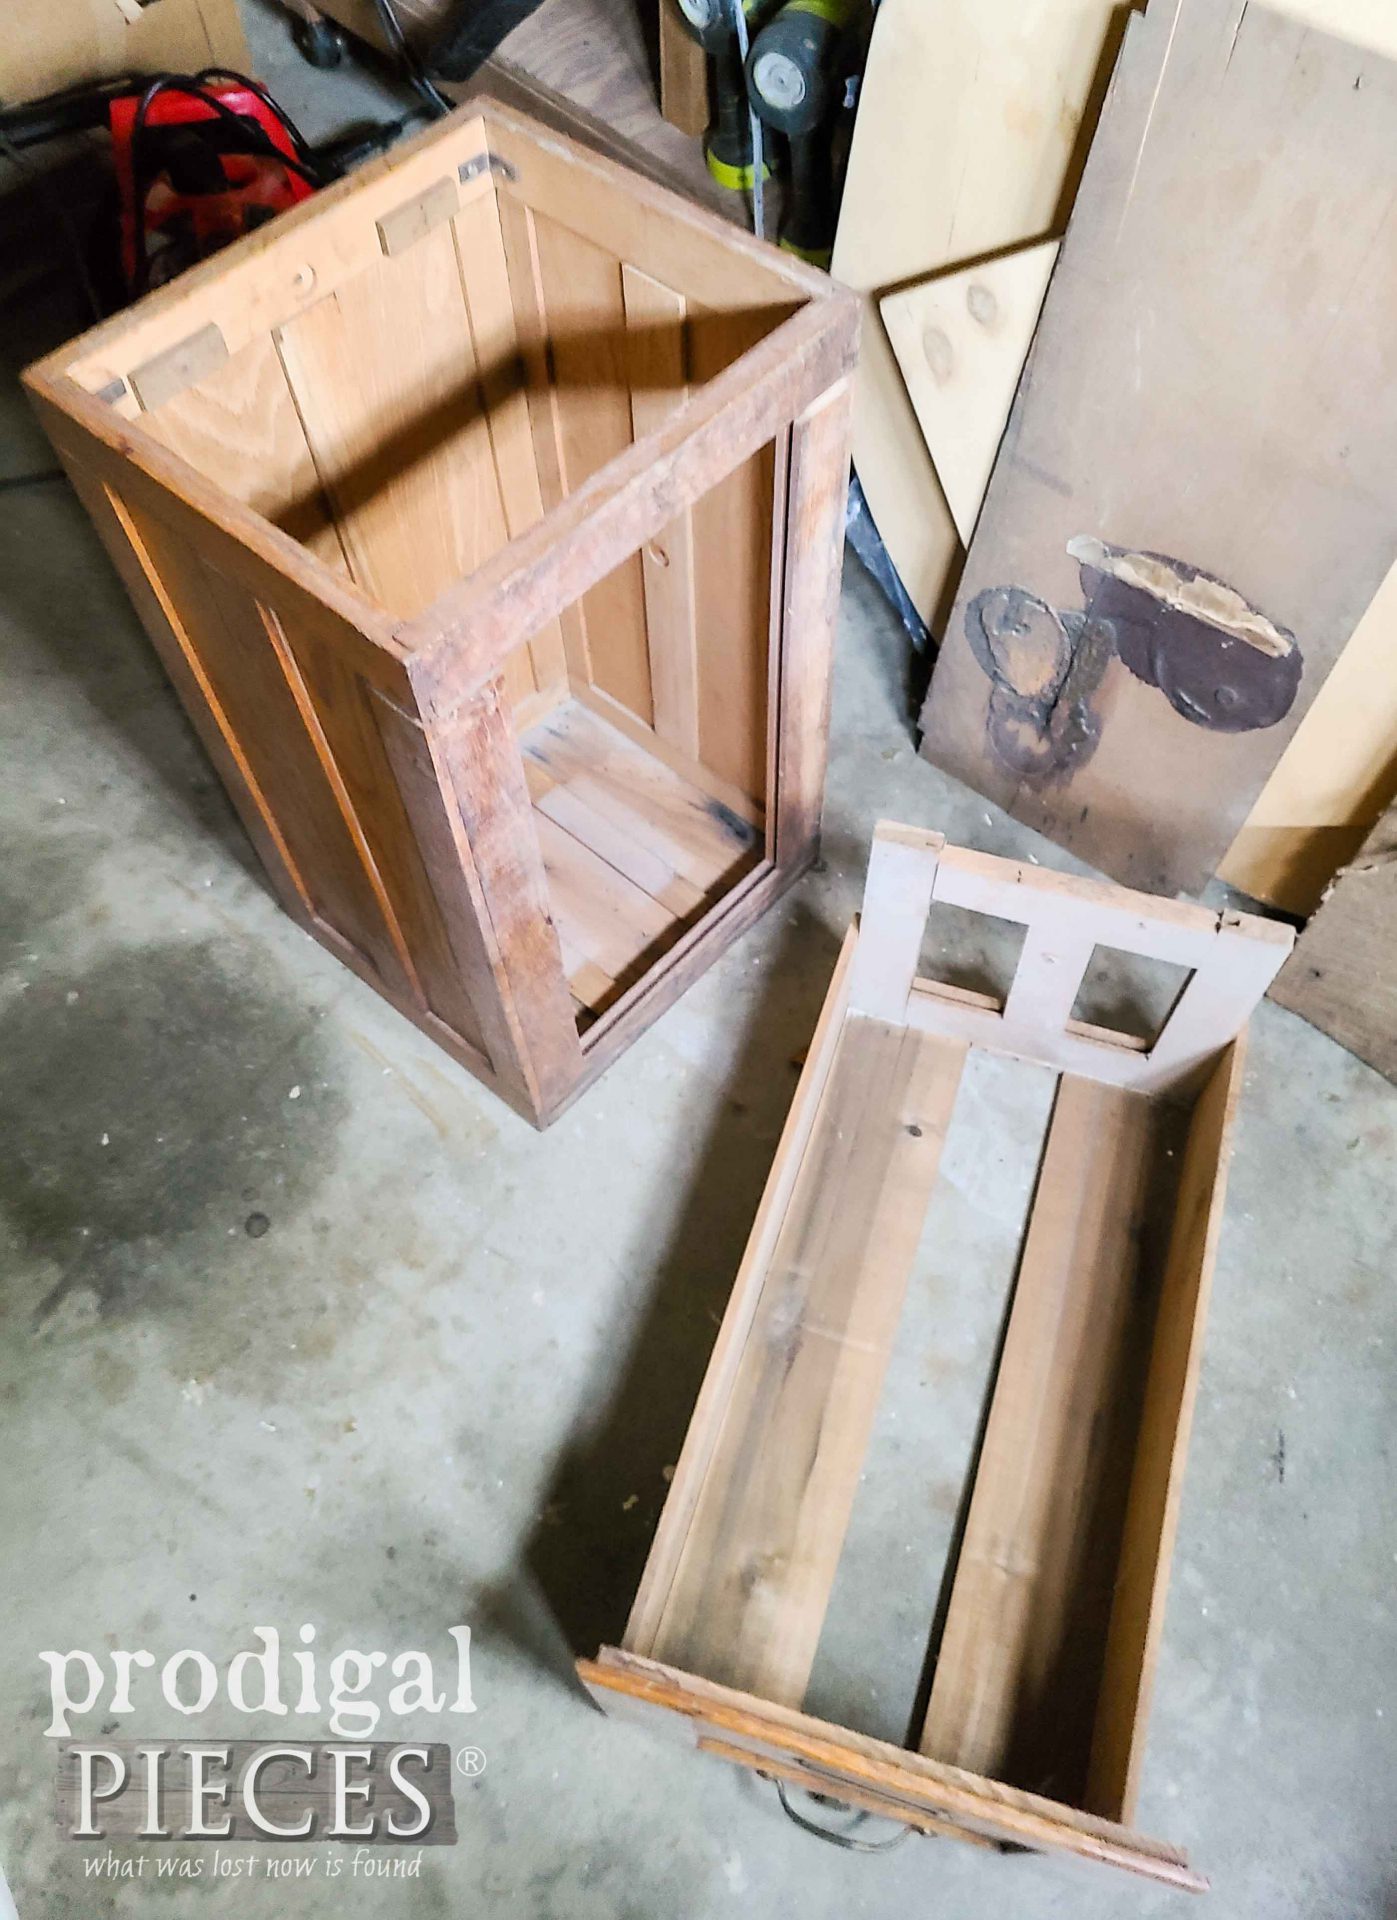 Industrial Filing Cabinet Drawer Removed | prodigalpieces.com #prodigalpieces